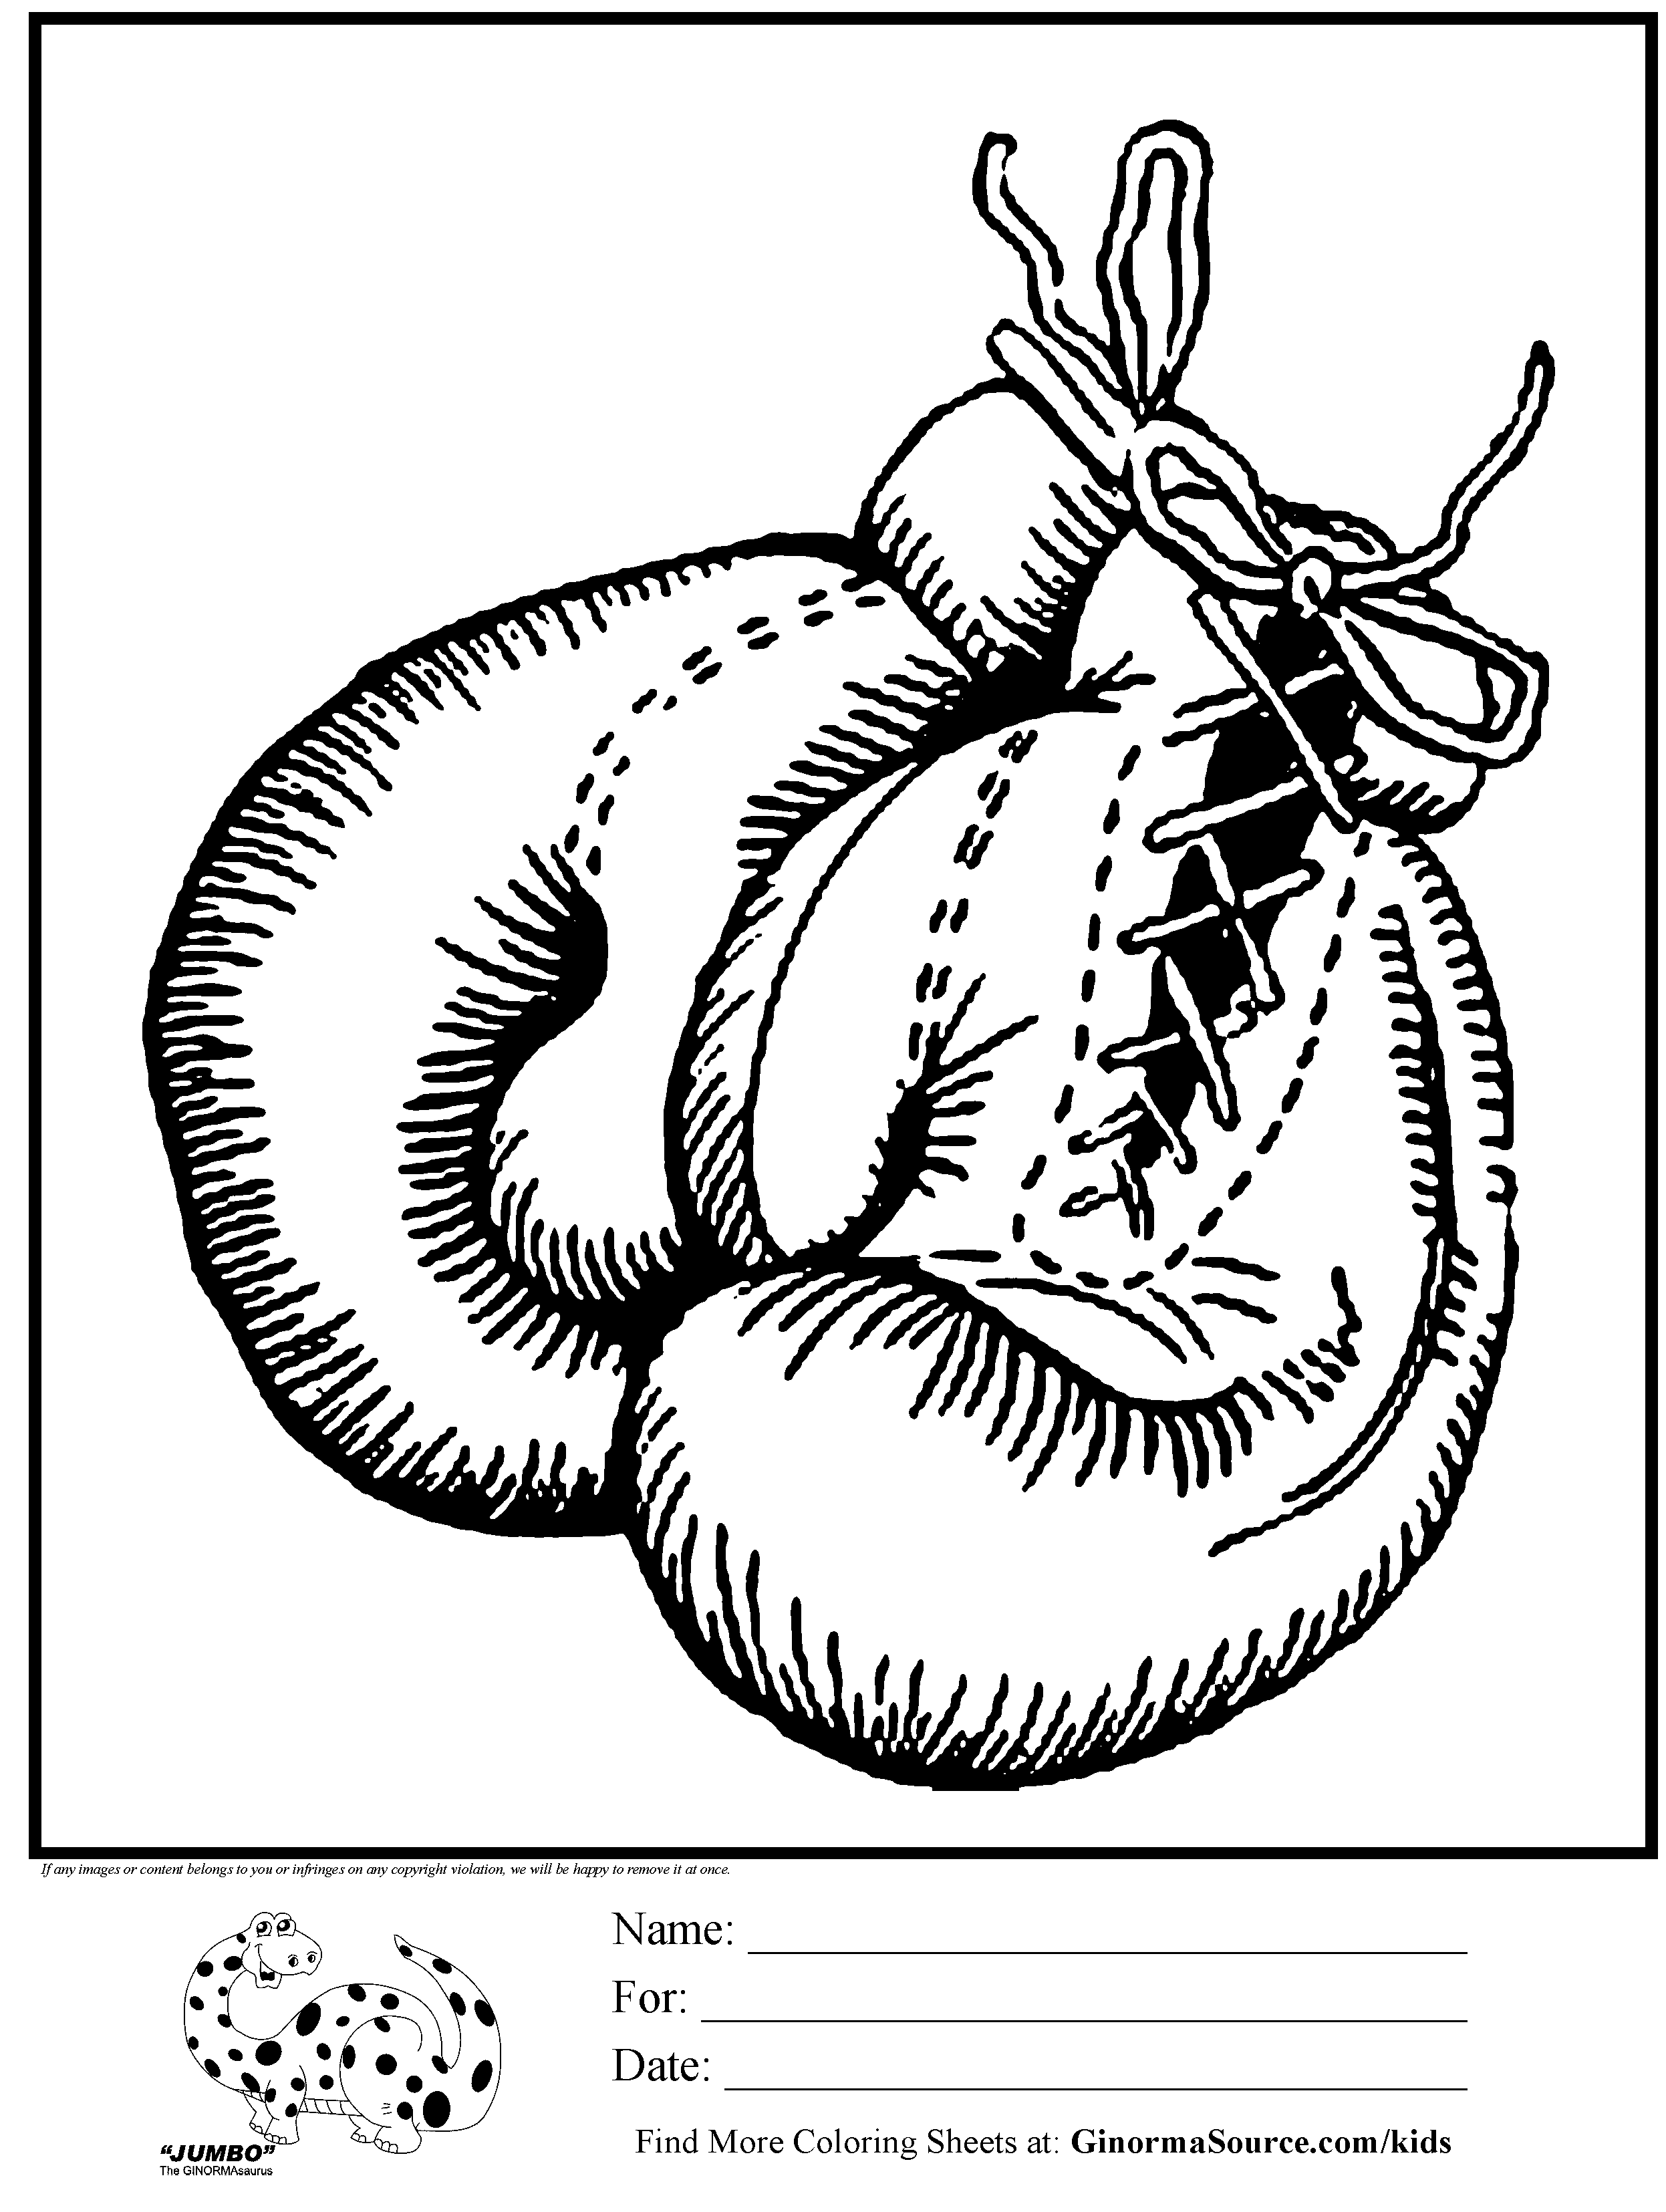 Awesome Coloring Page Boxing Gloves - GINORMAsource Kids